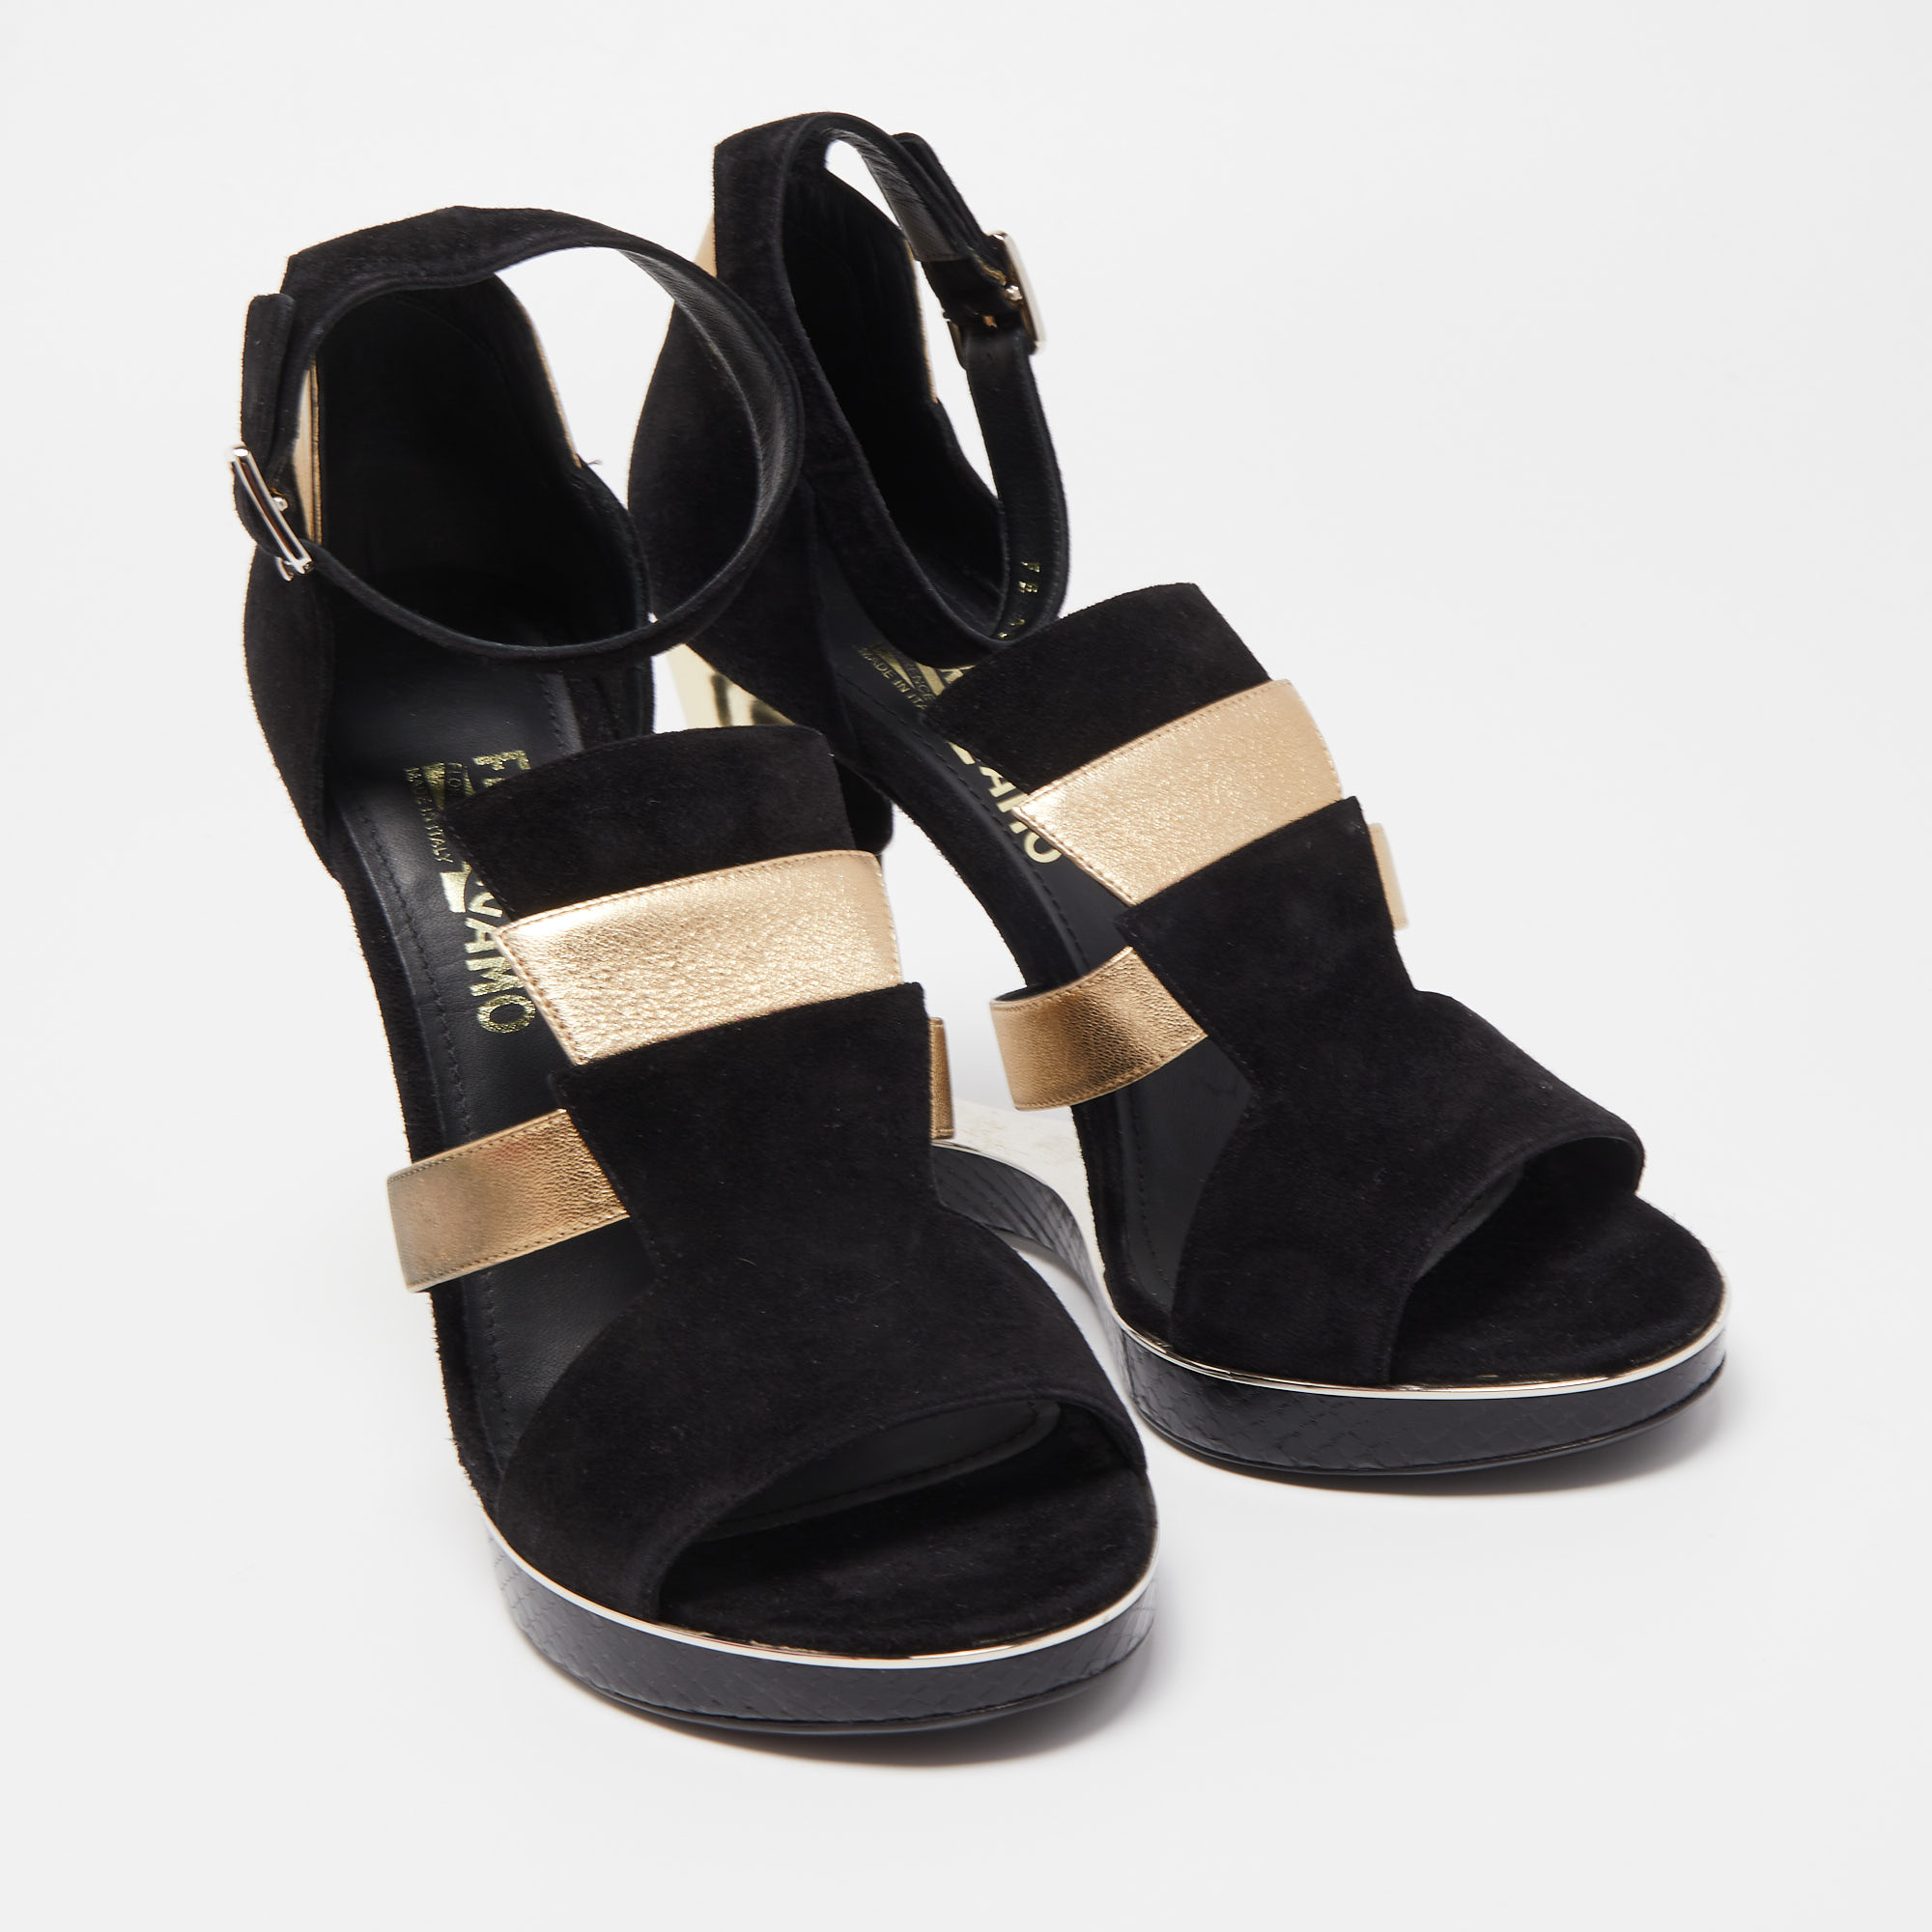 Salvatore Ferragamo Black/Gold Suede And Leather Wedge Sandals Size 39.5